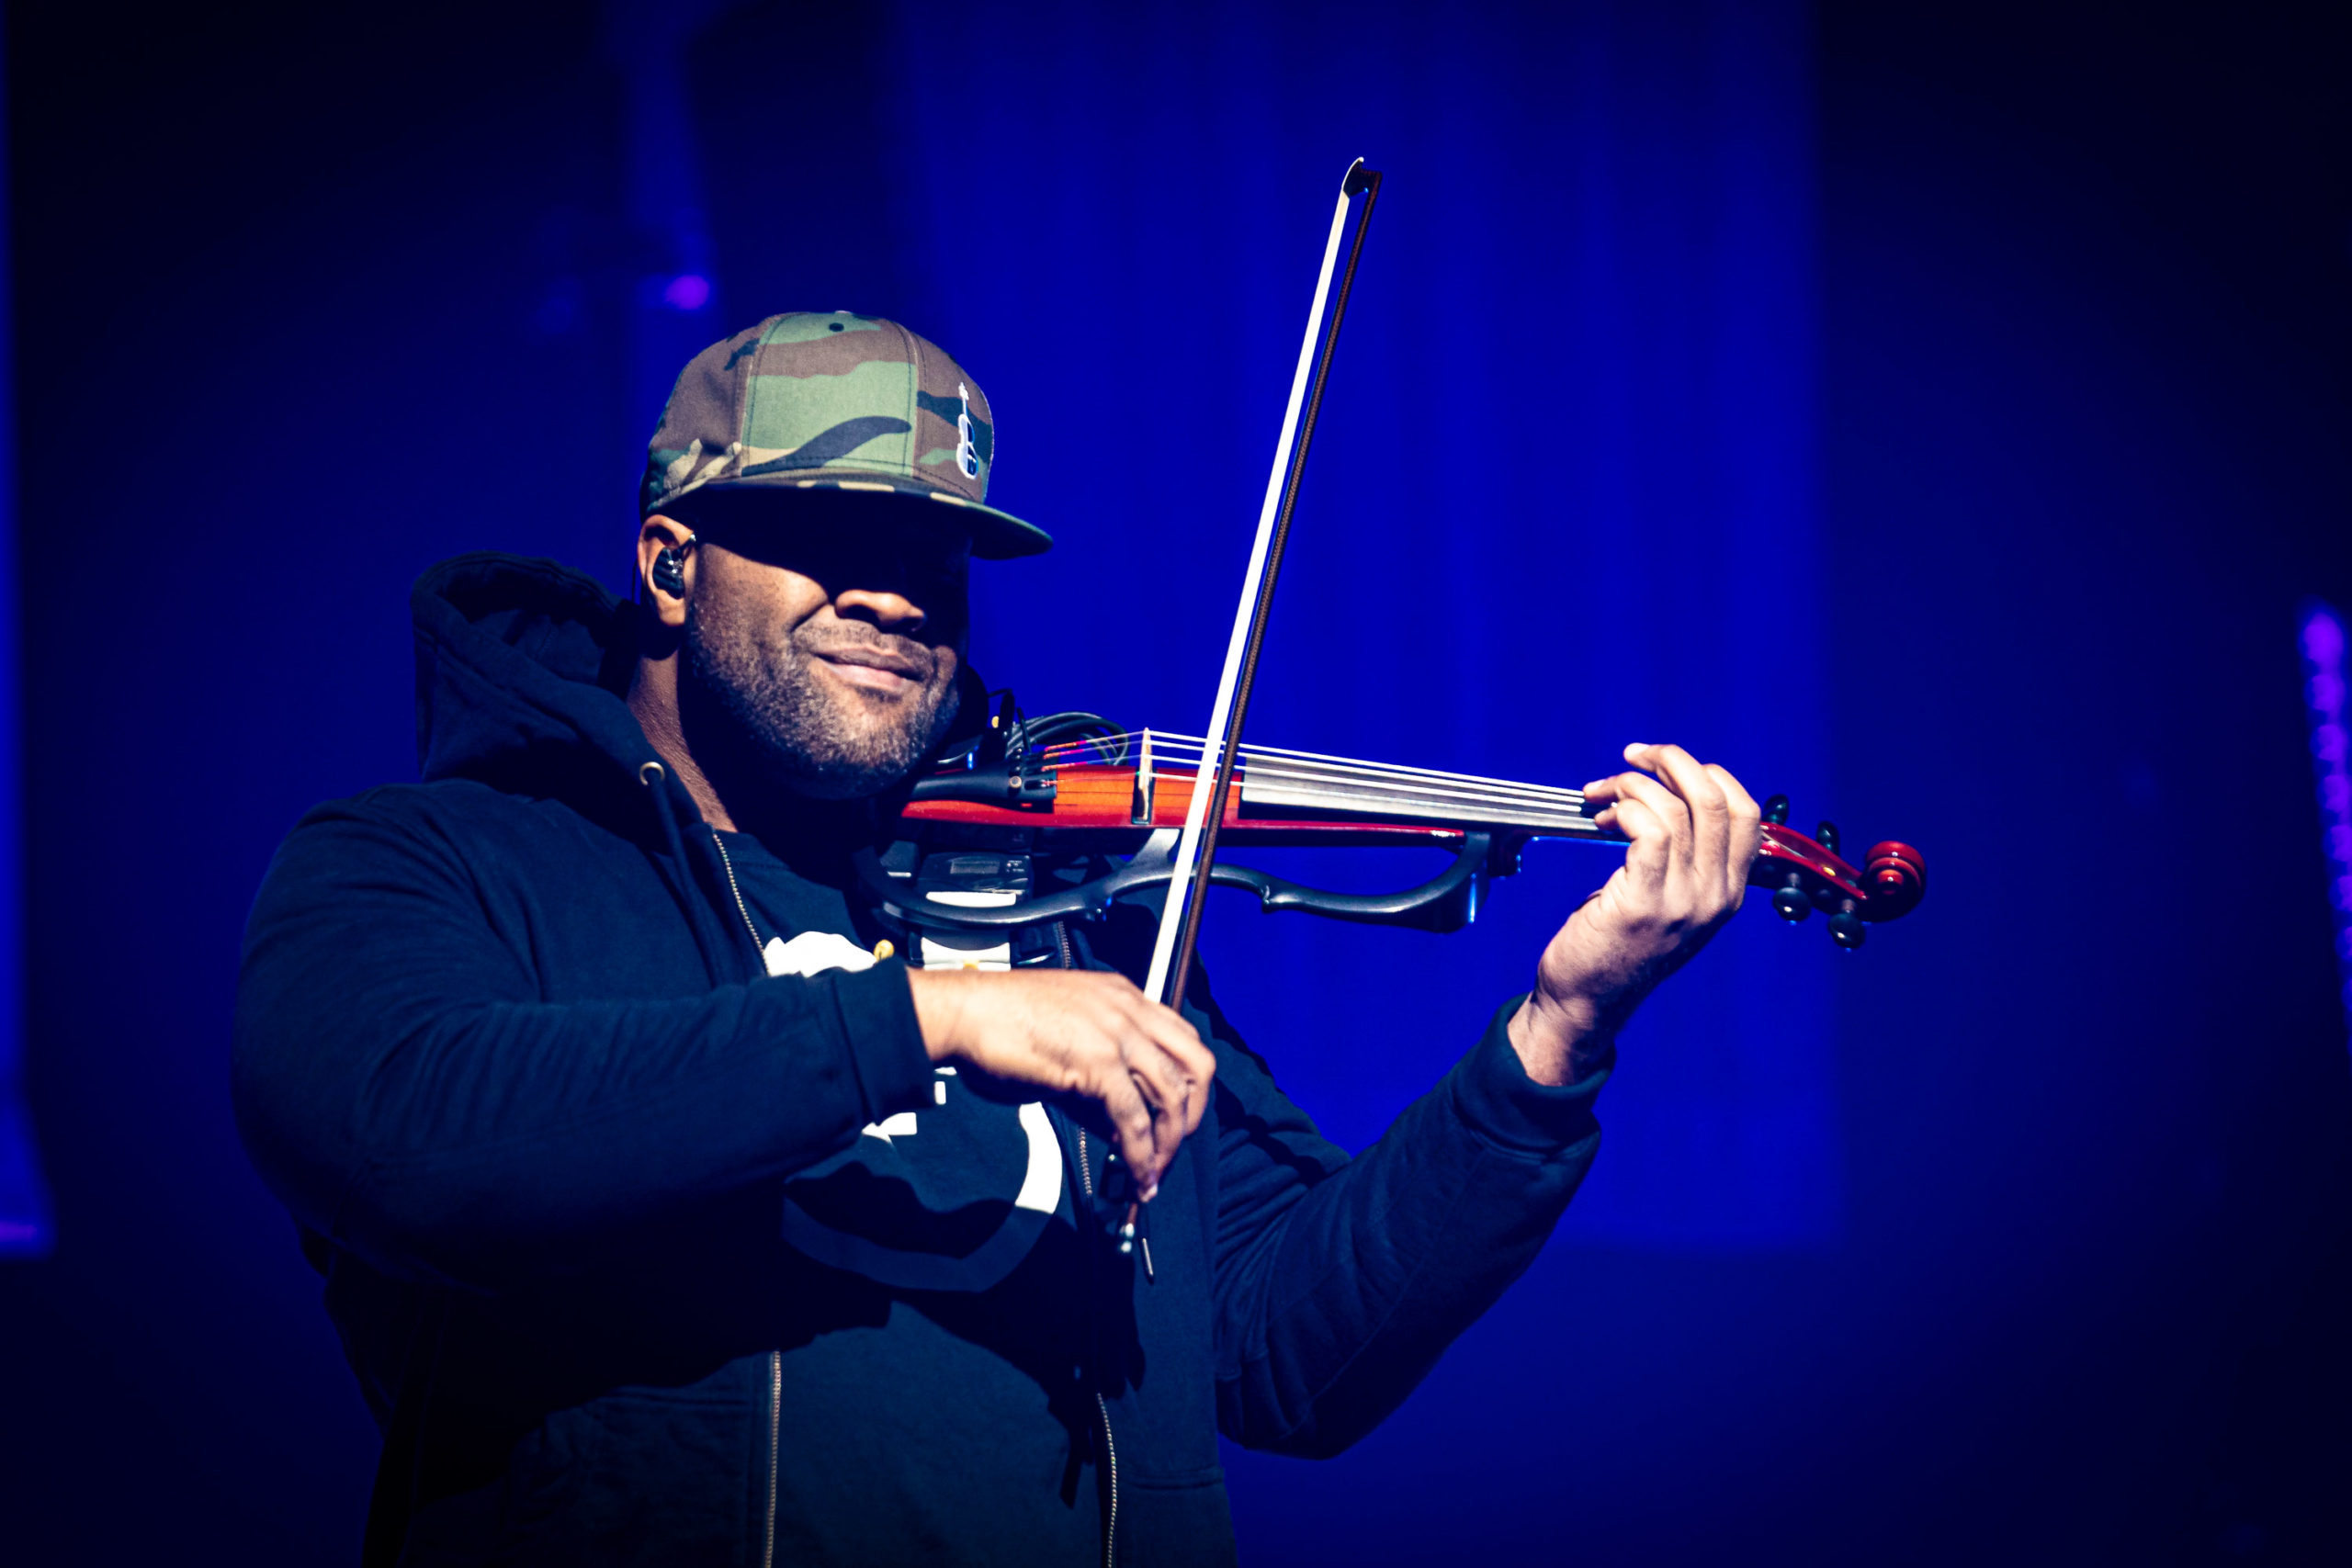 Classical/hiphop group Black Violin honors their roots while paying